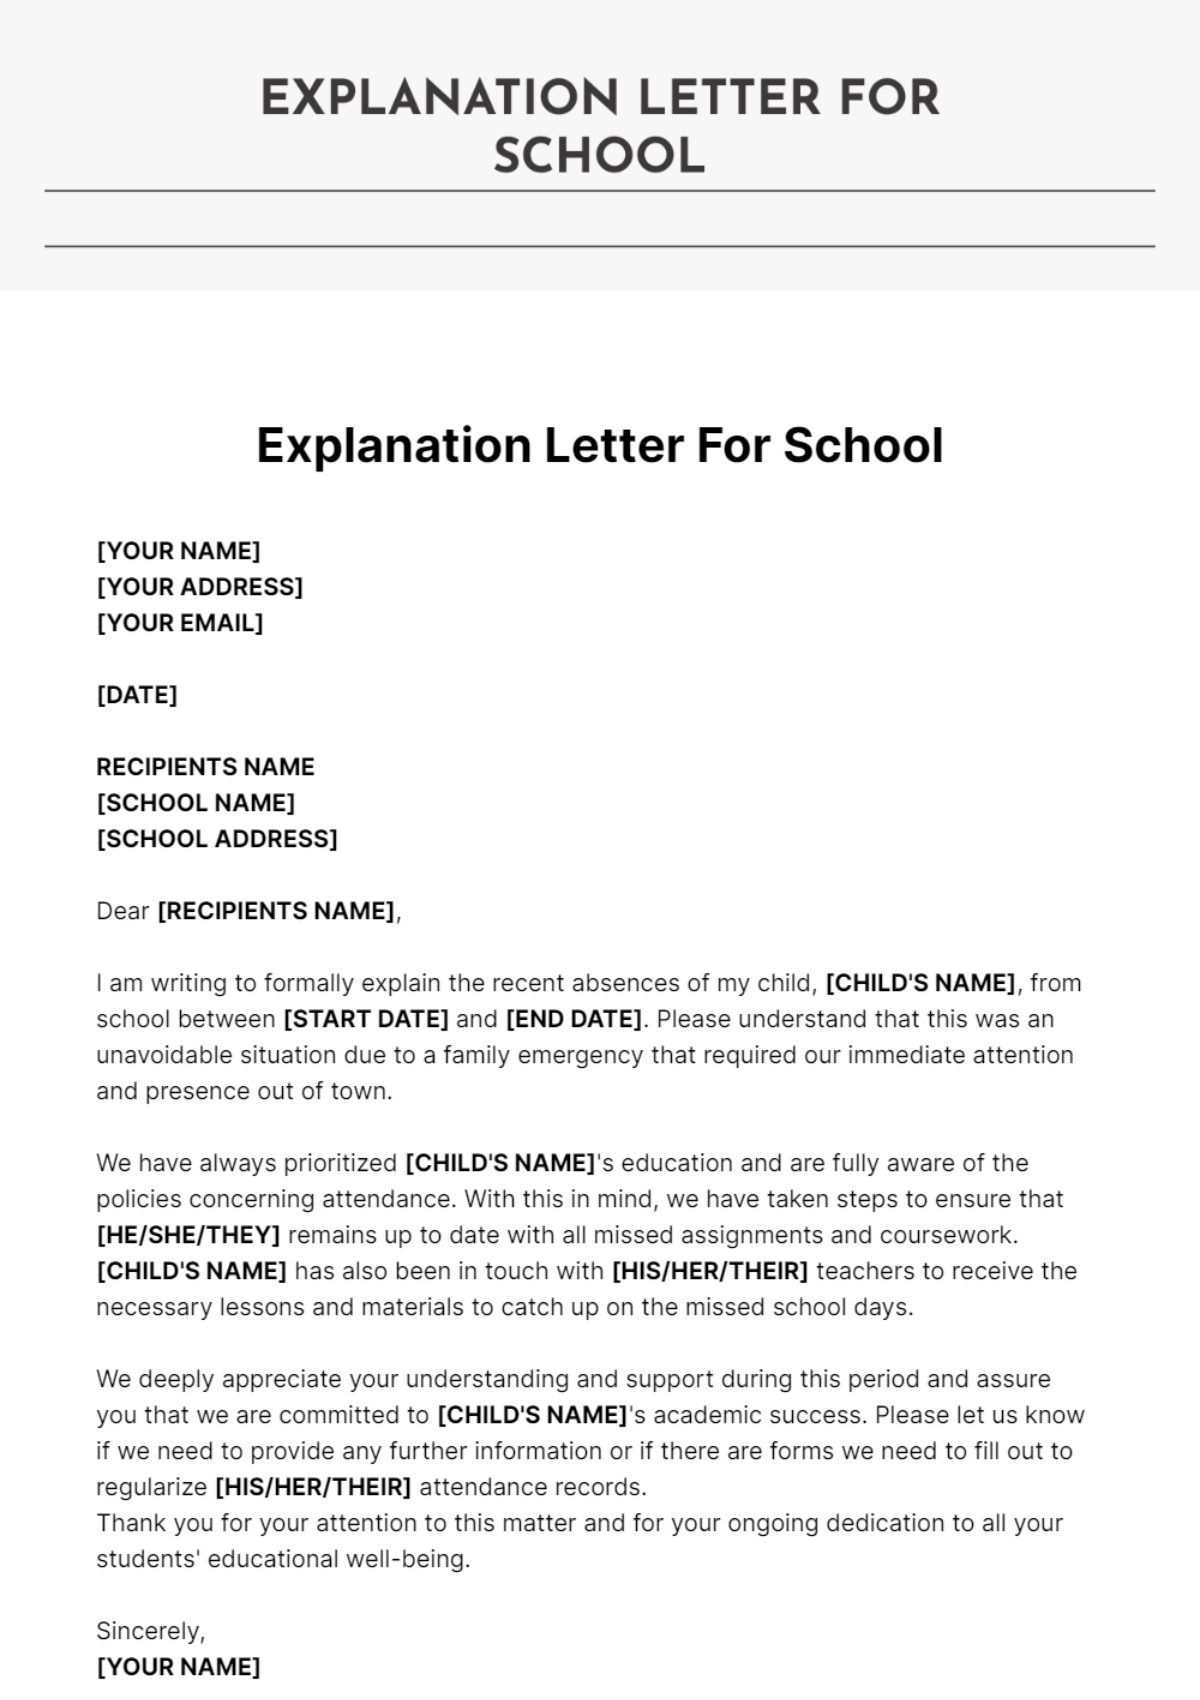 Explanation Letter For School Template